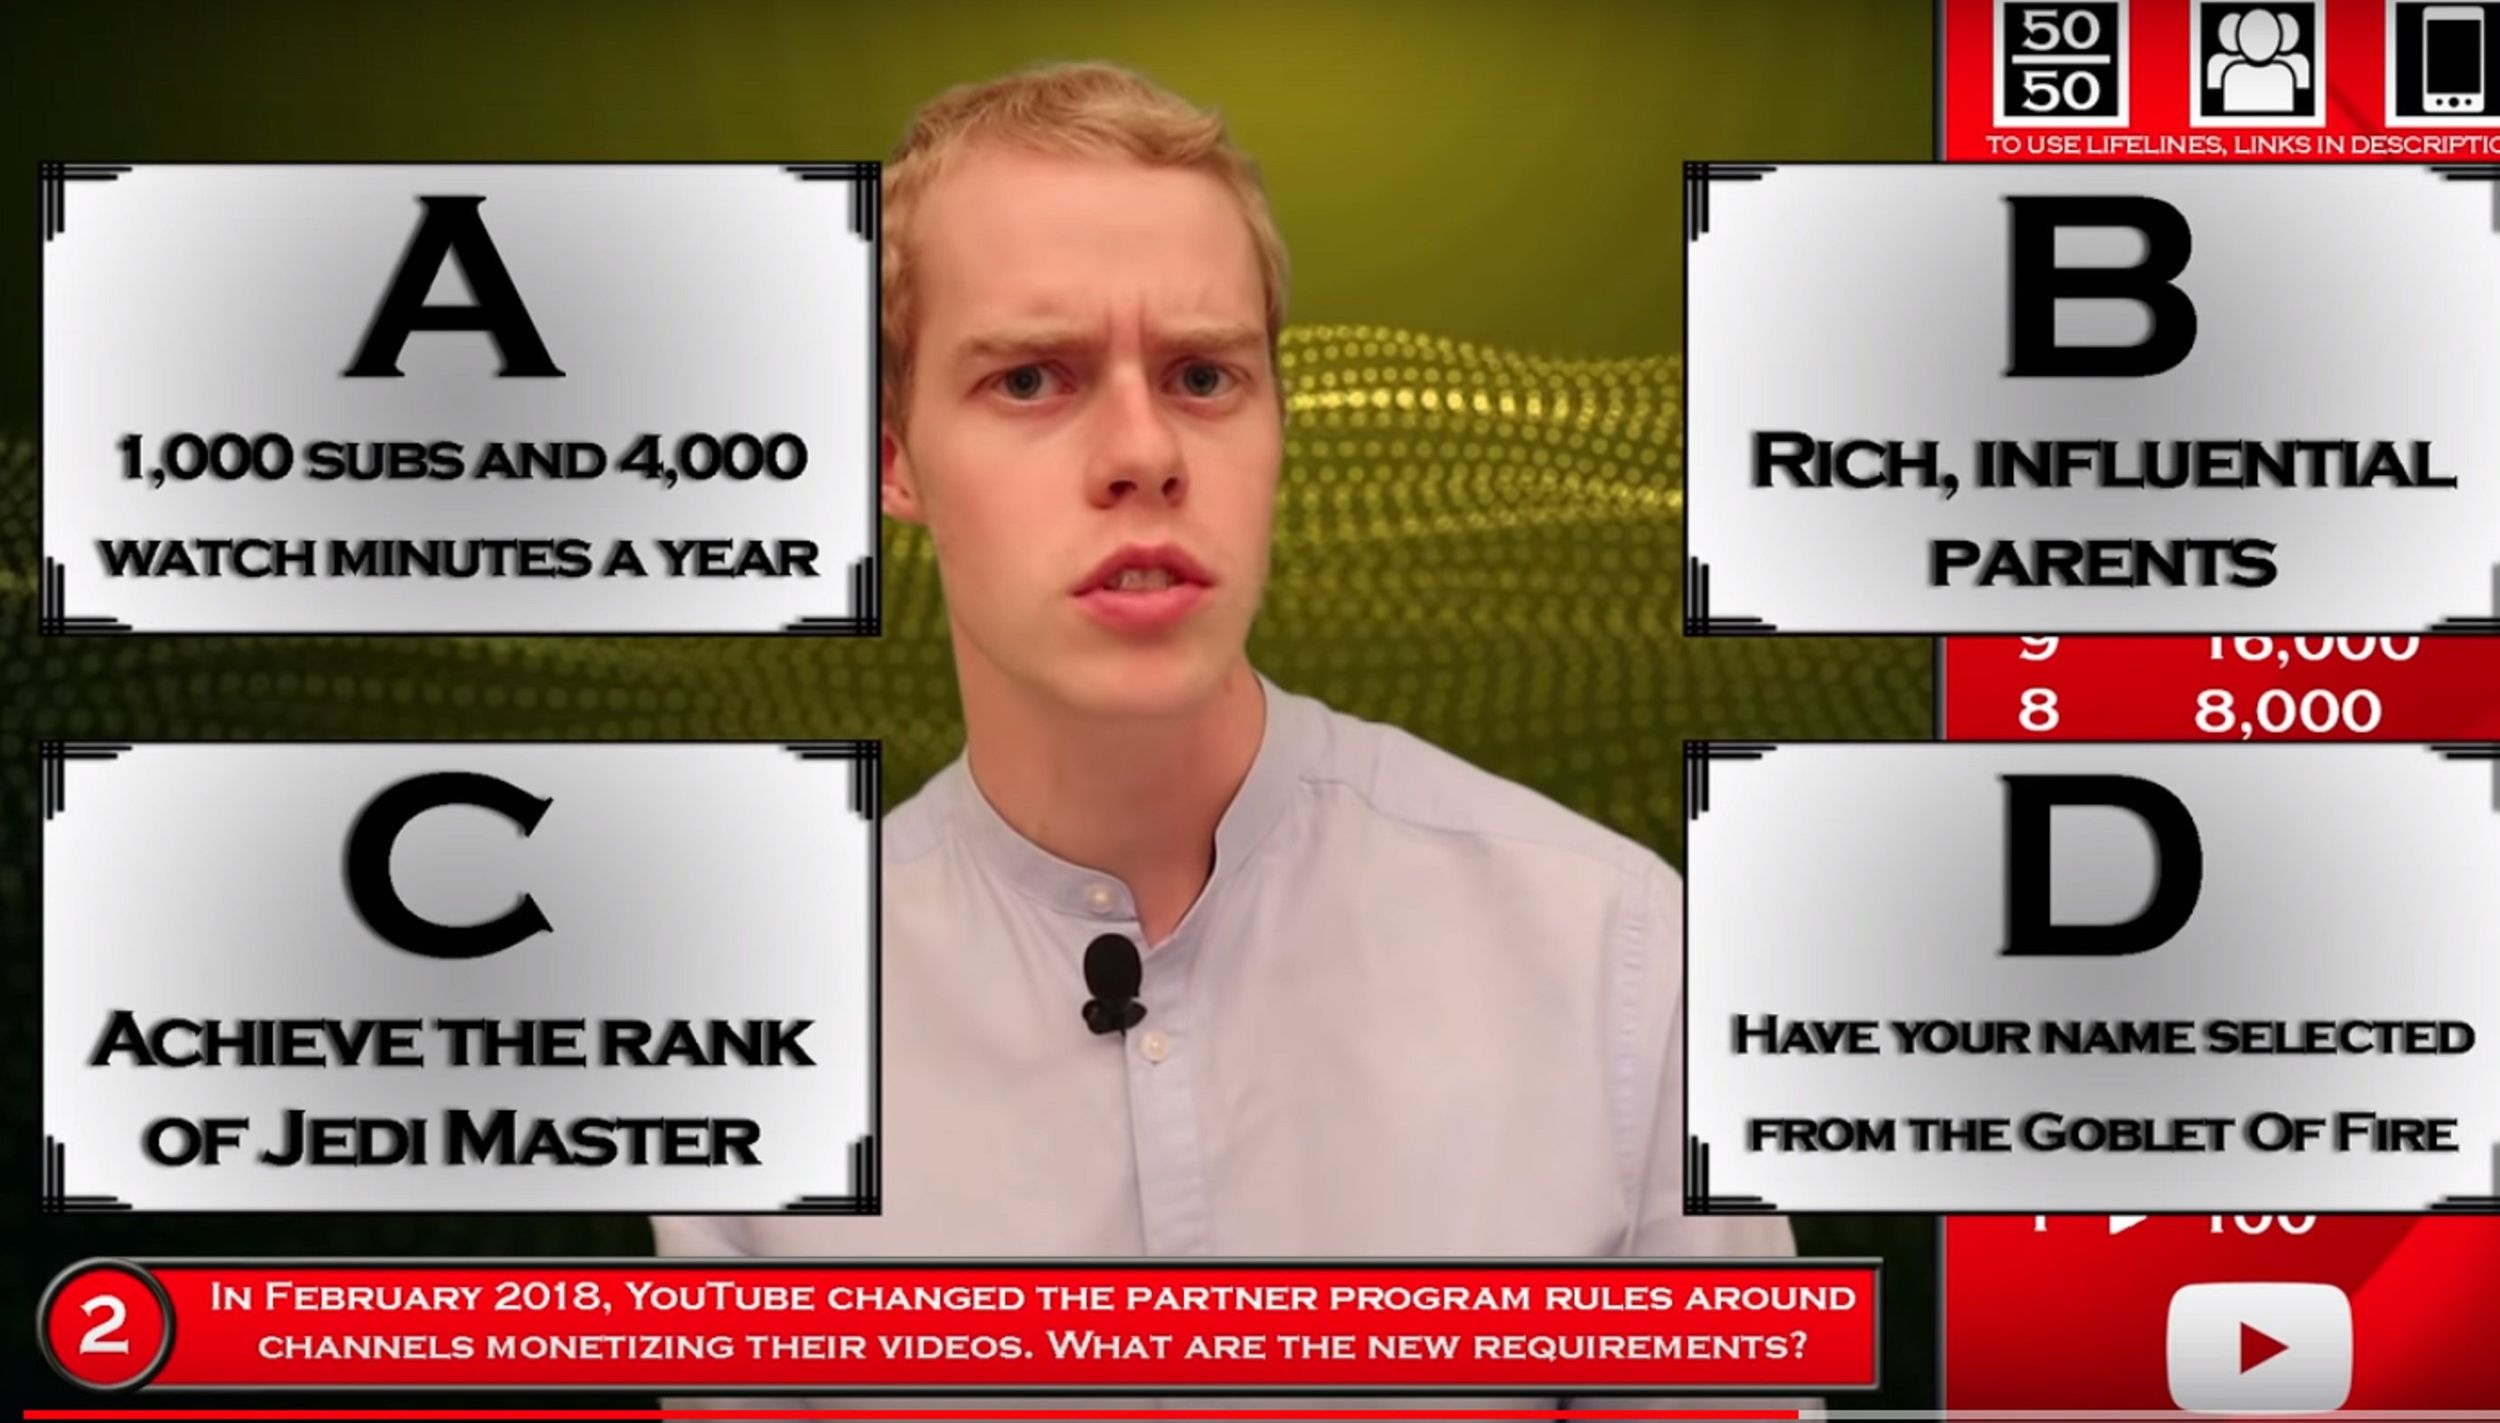 YouTuber Films Over 1,000 Videos For 'Who Wants To Be A Millionaire'-Style Quiz—And It's Impressive AF 😮